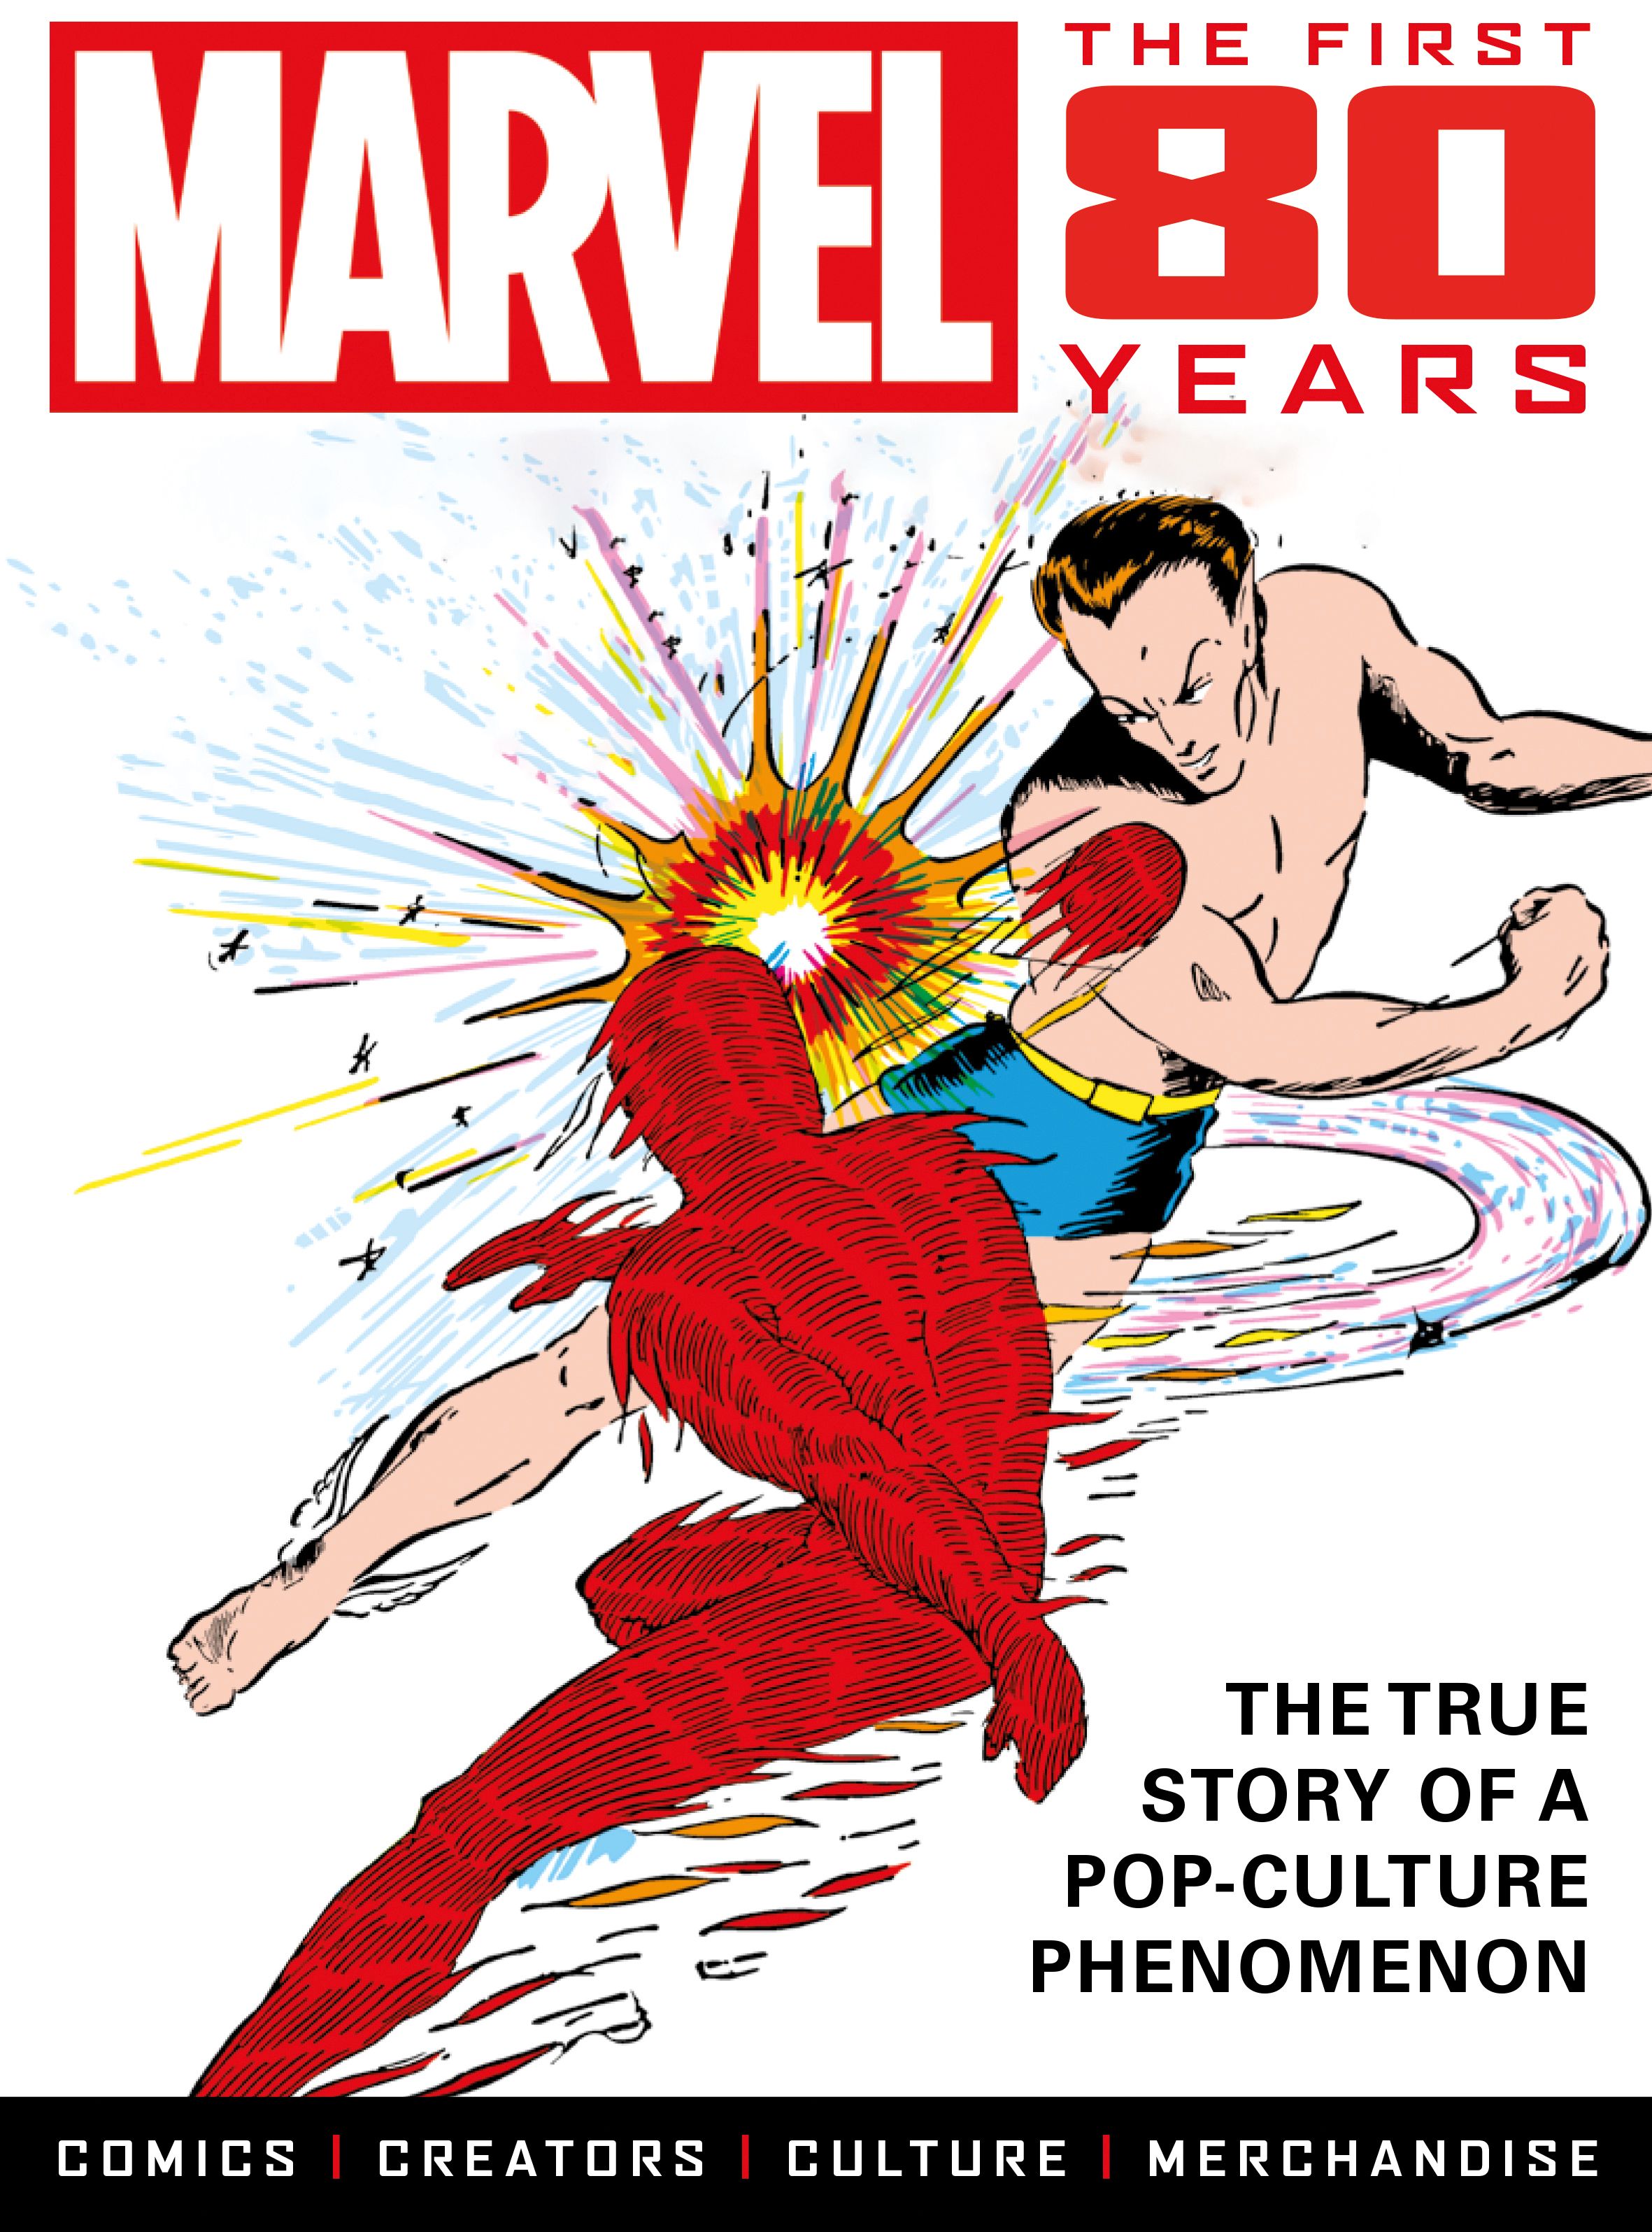 Marvel: The First 80 Years - Exclusive Diamond Cover